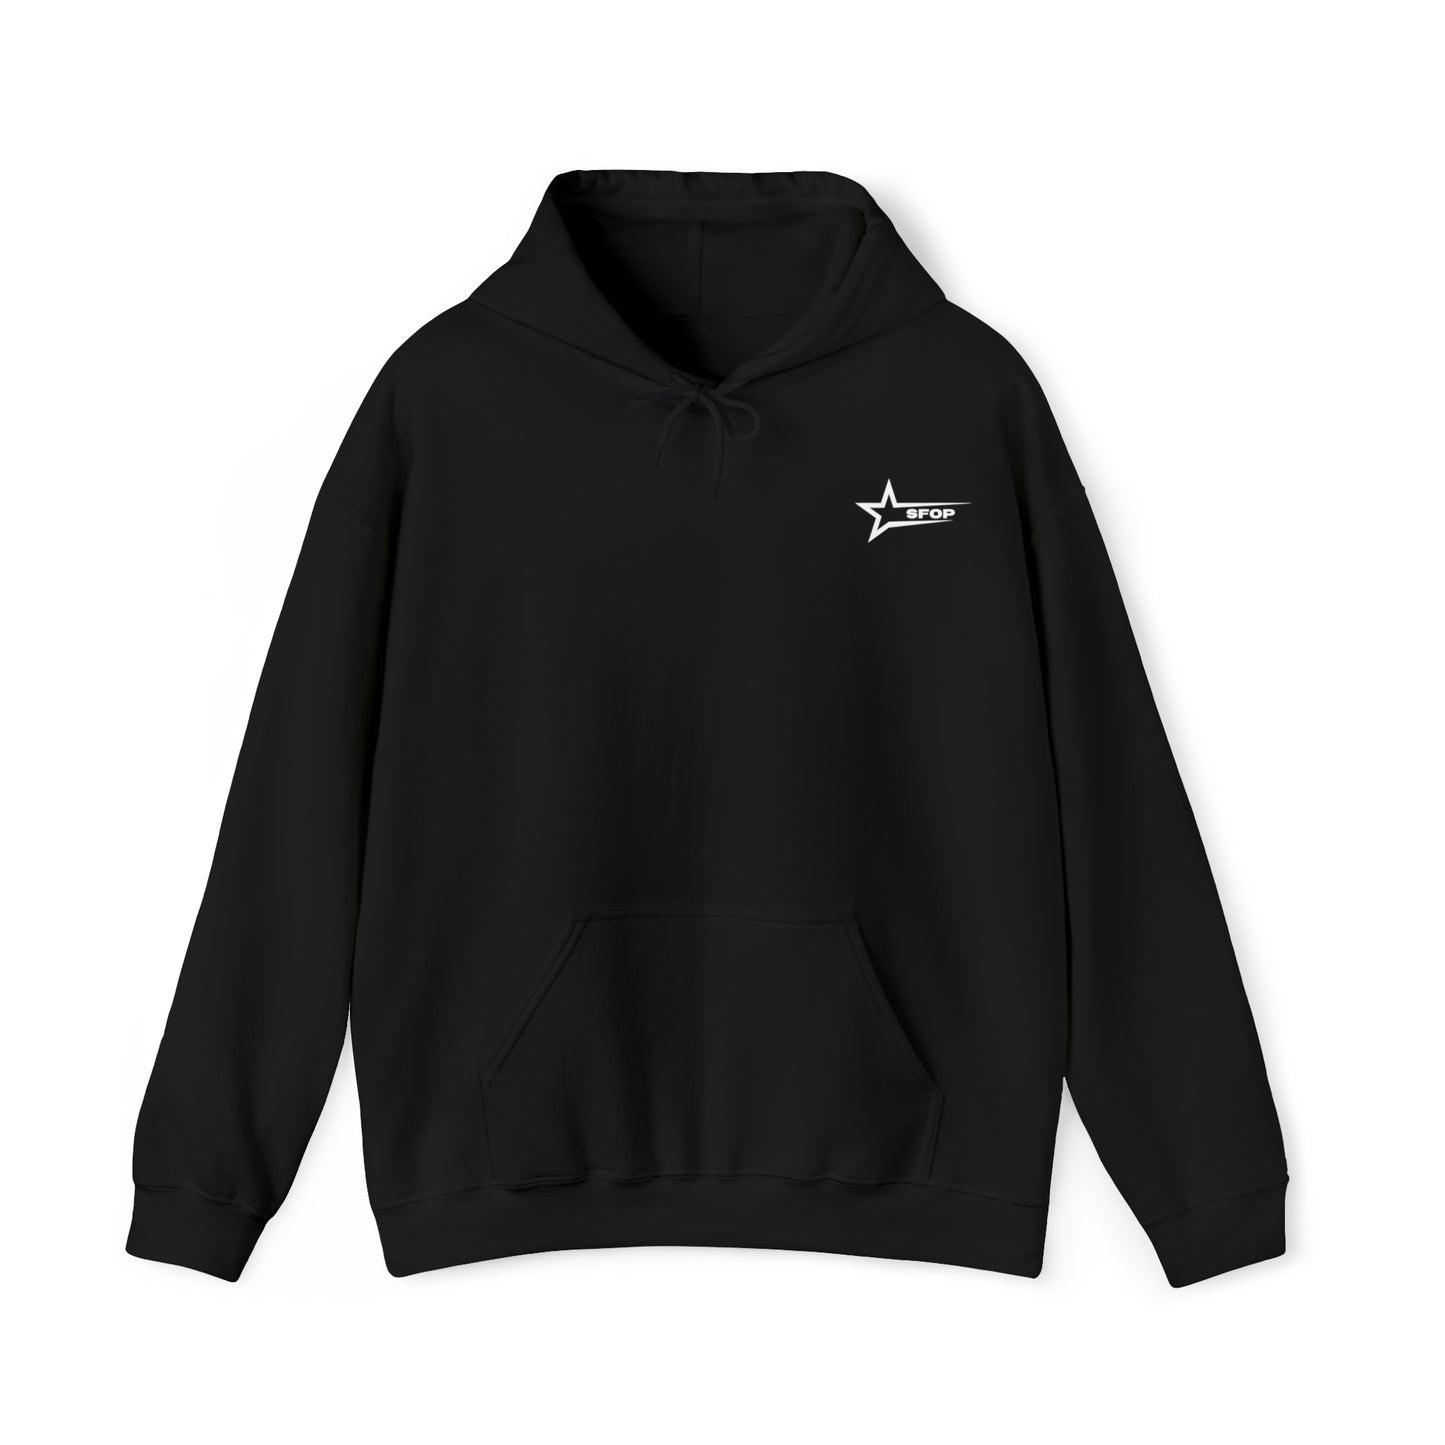 Destined For Greatness Hoodie